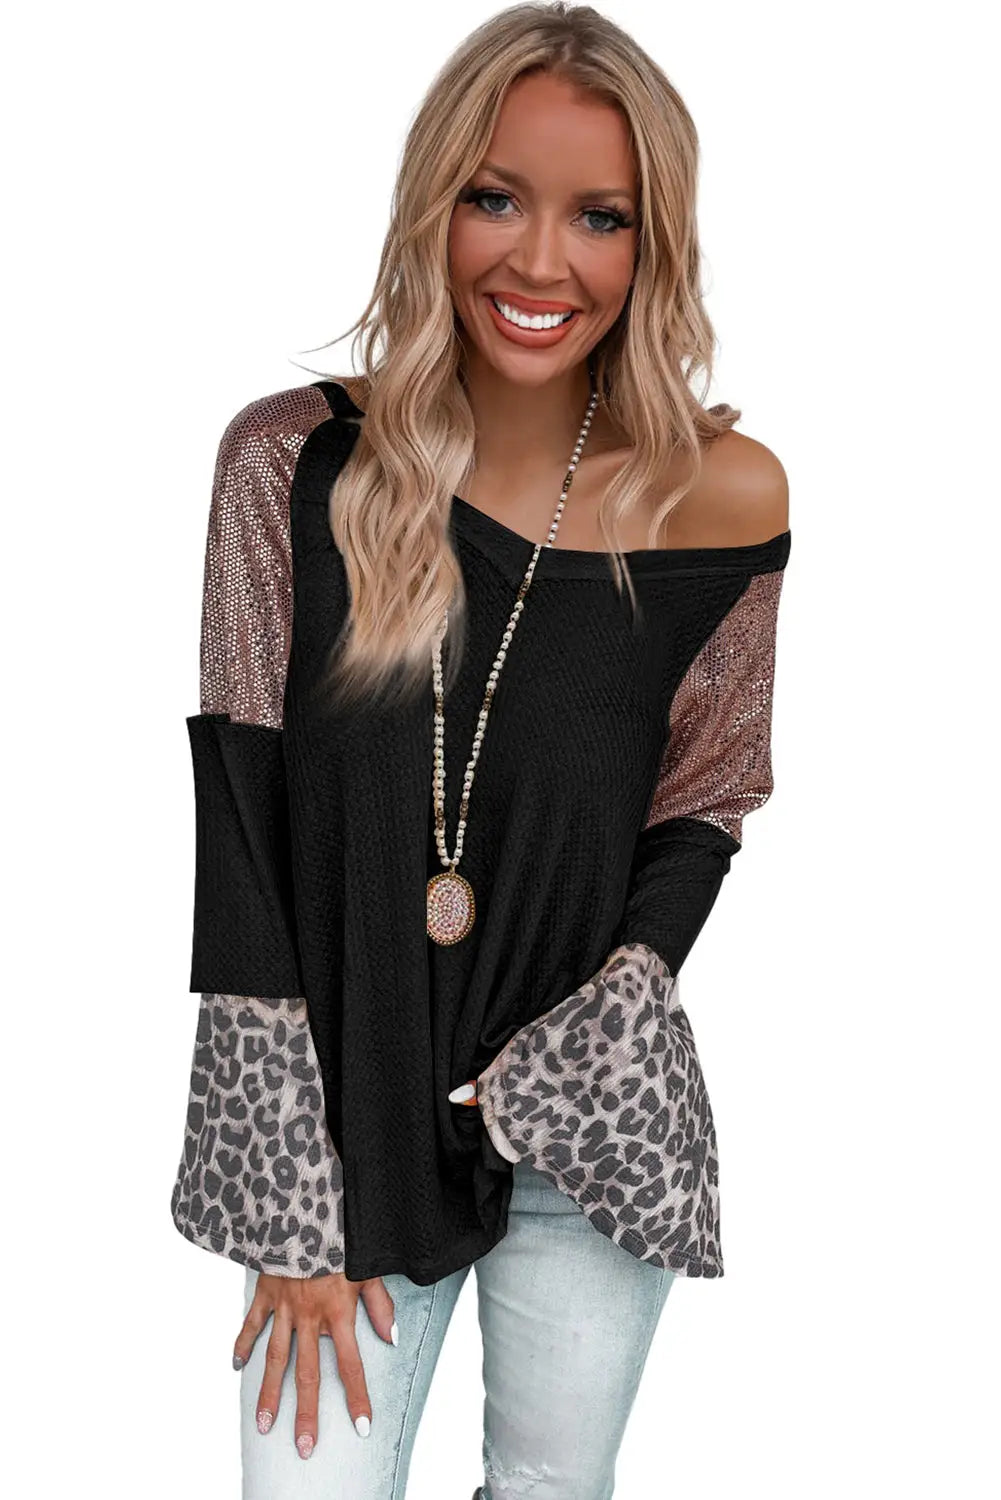 White sequin patchwork bell sleeve v neck tunic top - tops